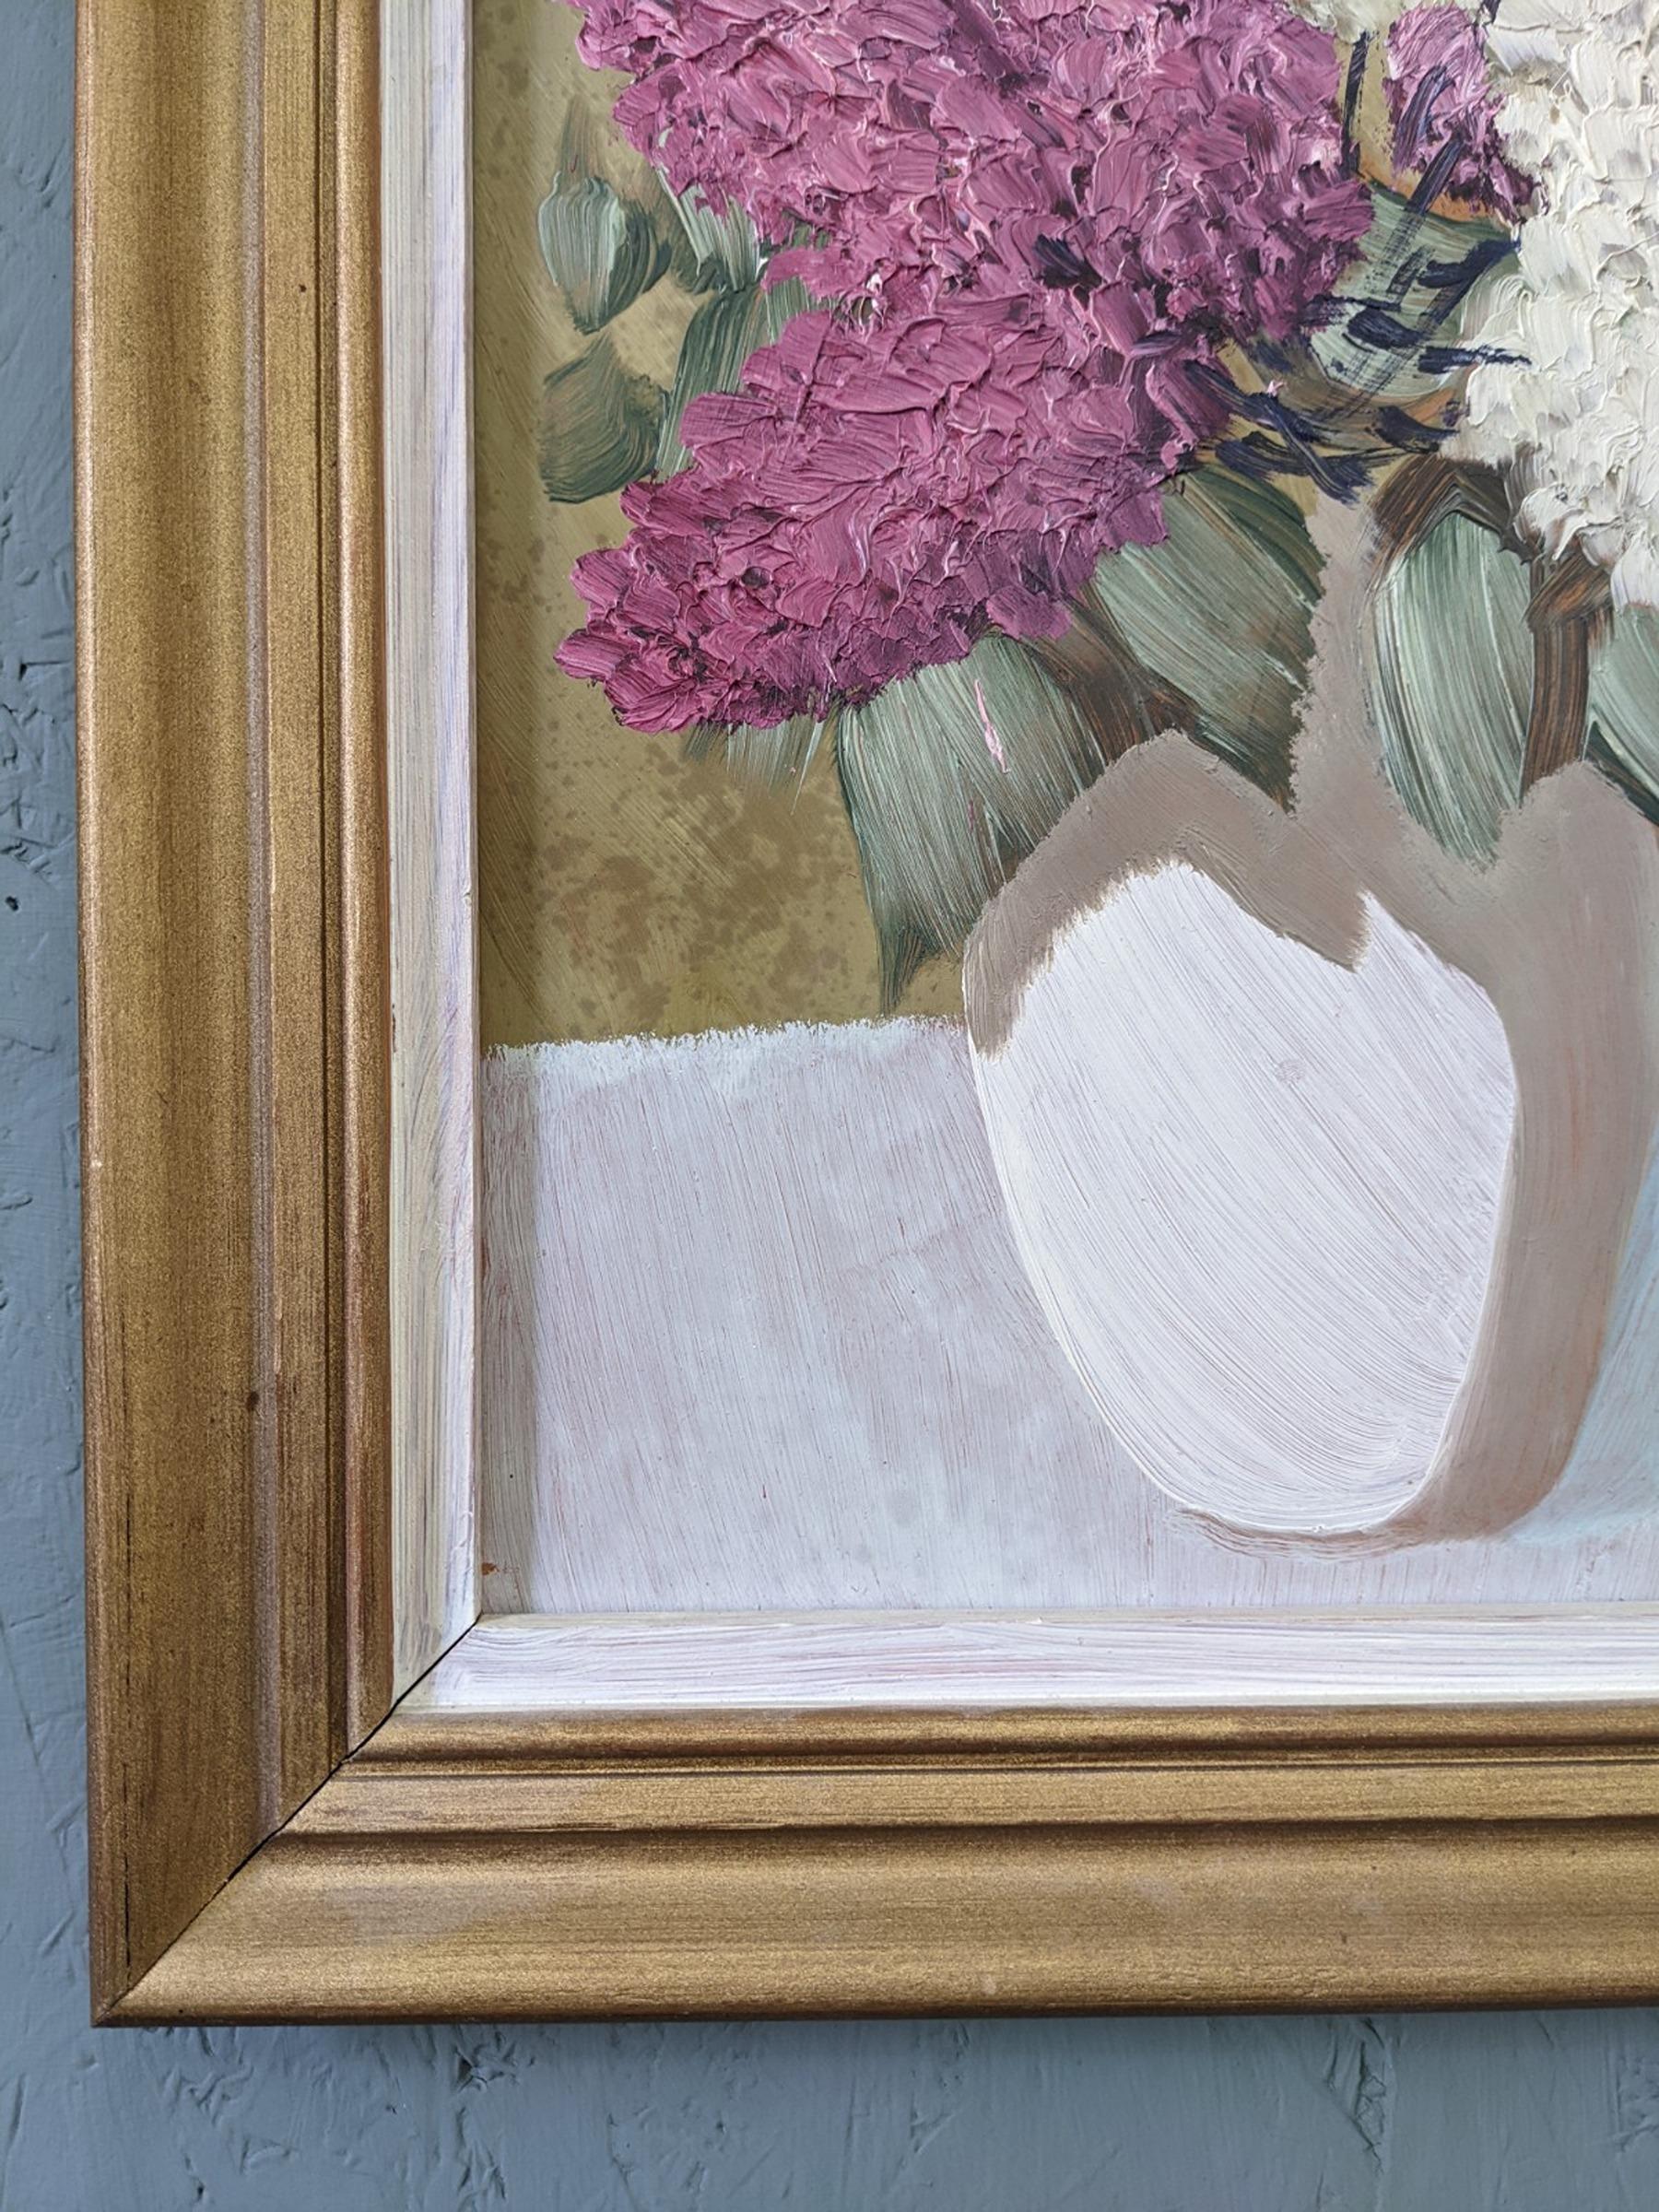 Vintage Mid-Century Swedish Floral Still Life Oil Painting - Hyacinths For Sale 4